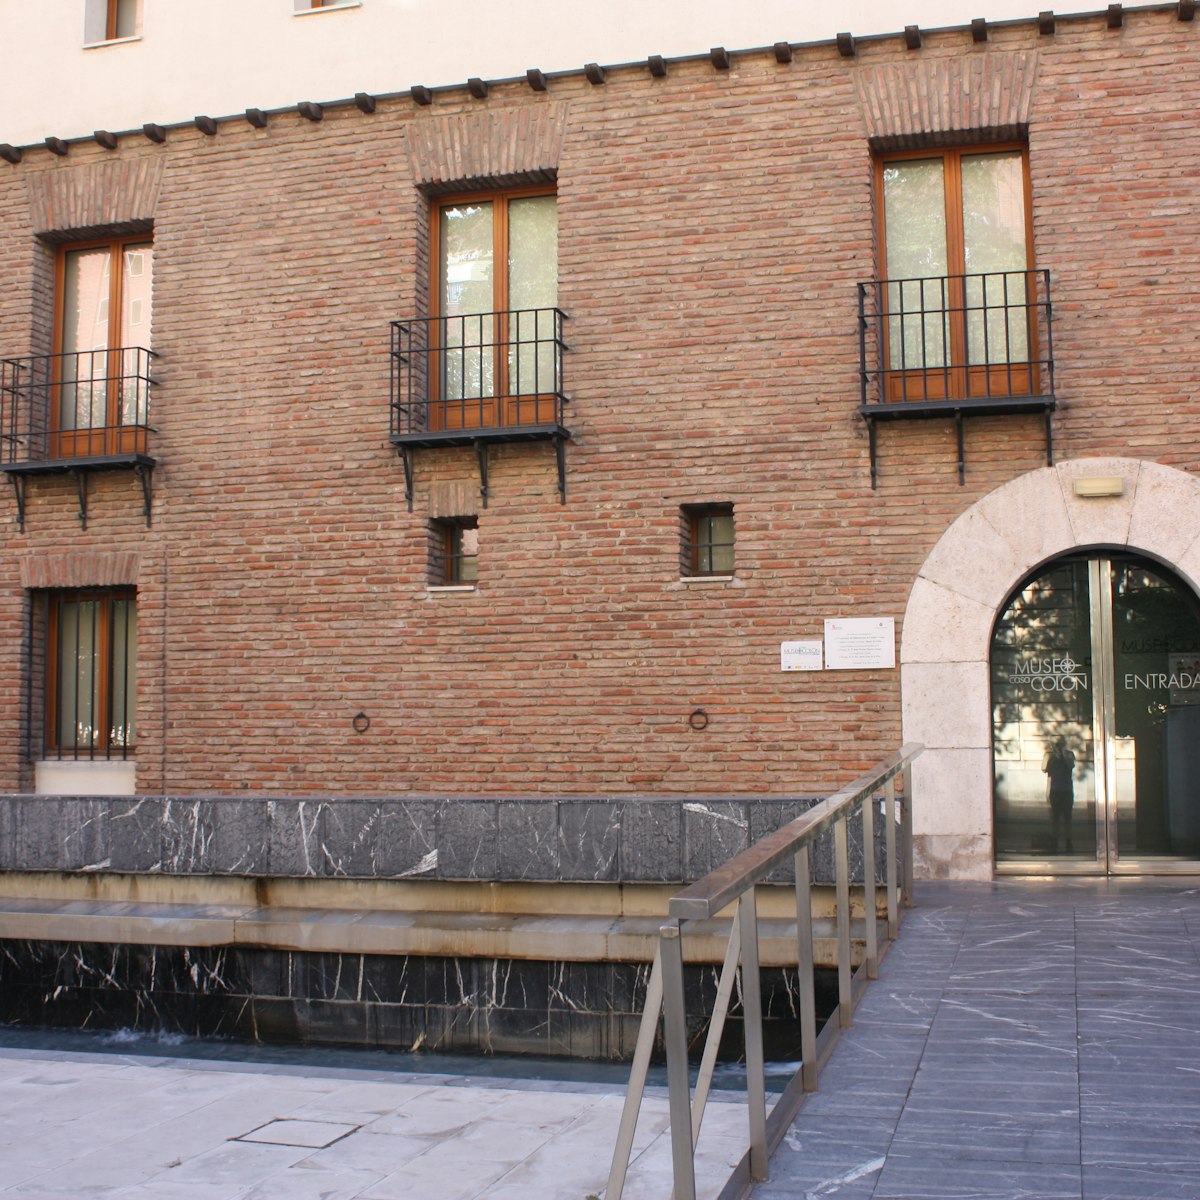 The house of Christopher Columbus in Valladolid, Spain.